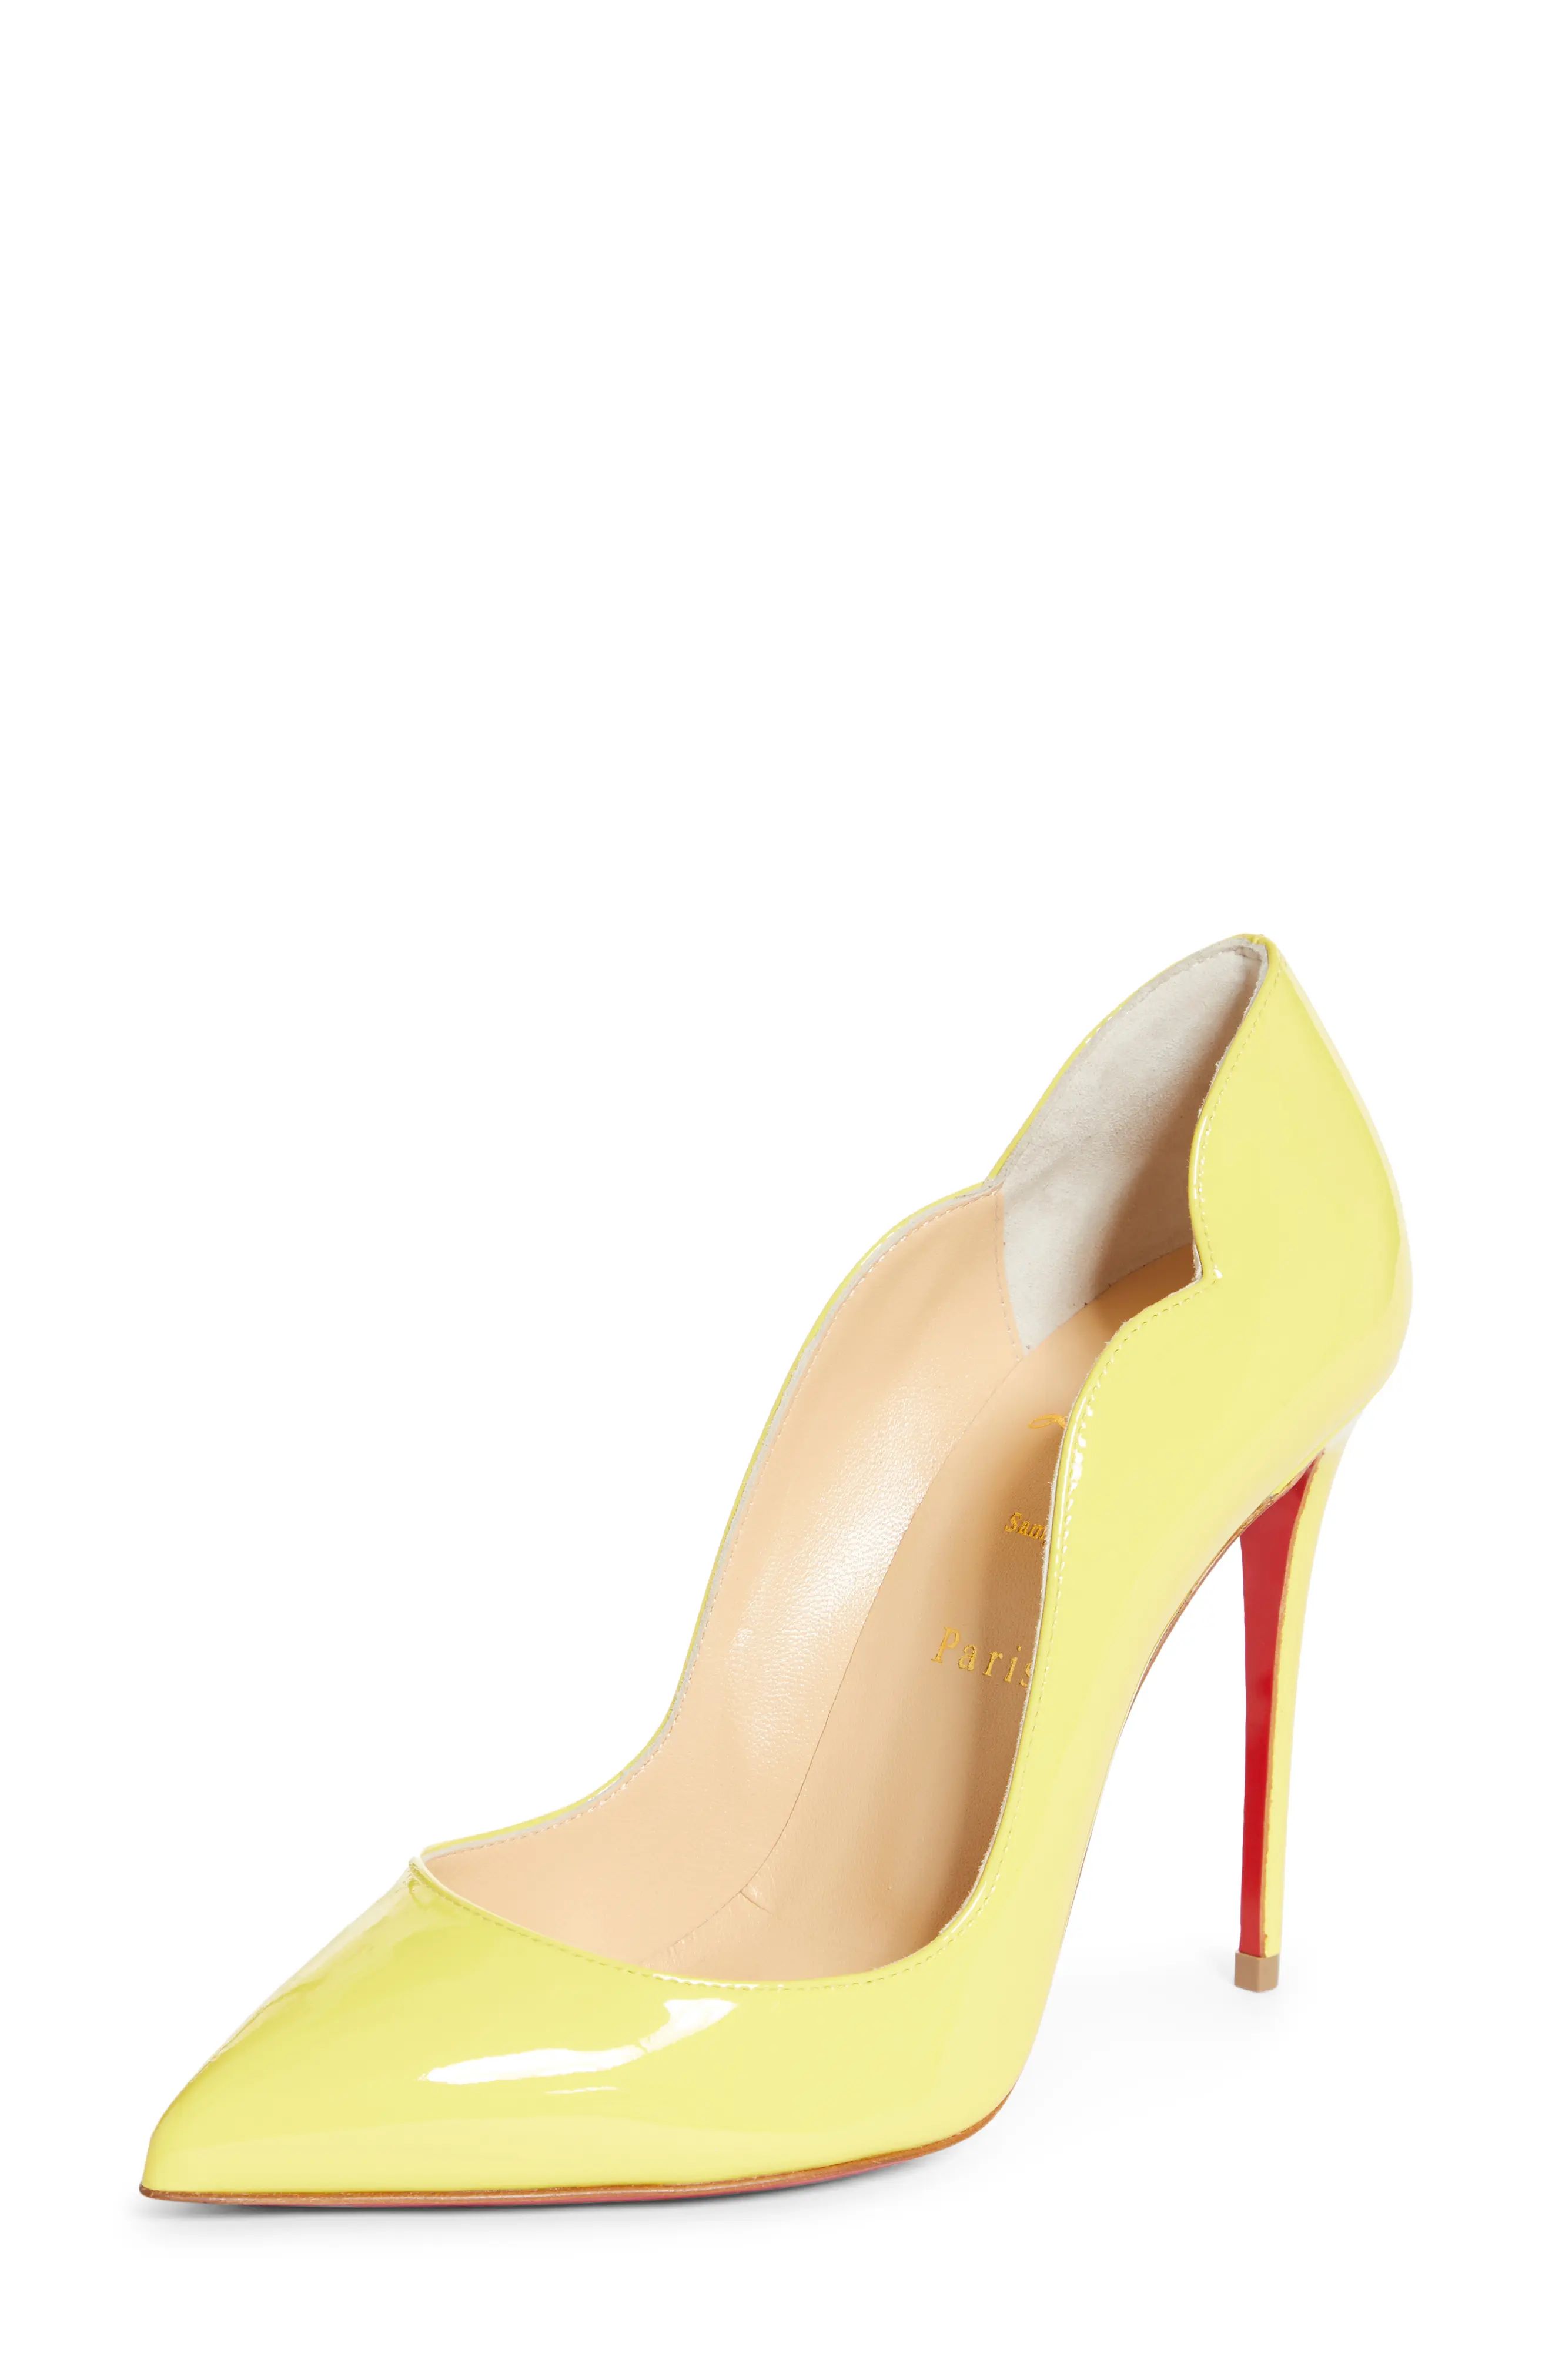 Women's Christian Louboutin Hot Chick Scallop Pointed Toe Pump, Size 10.5US - Yellow | Nordstrom